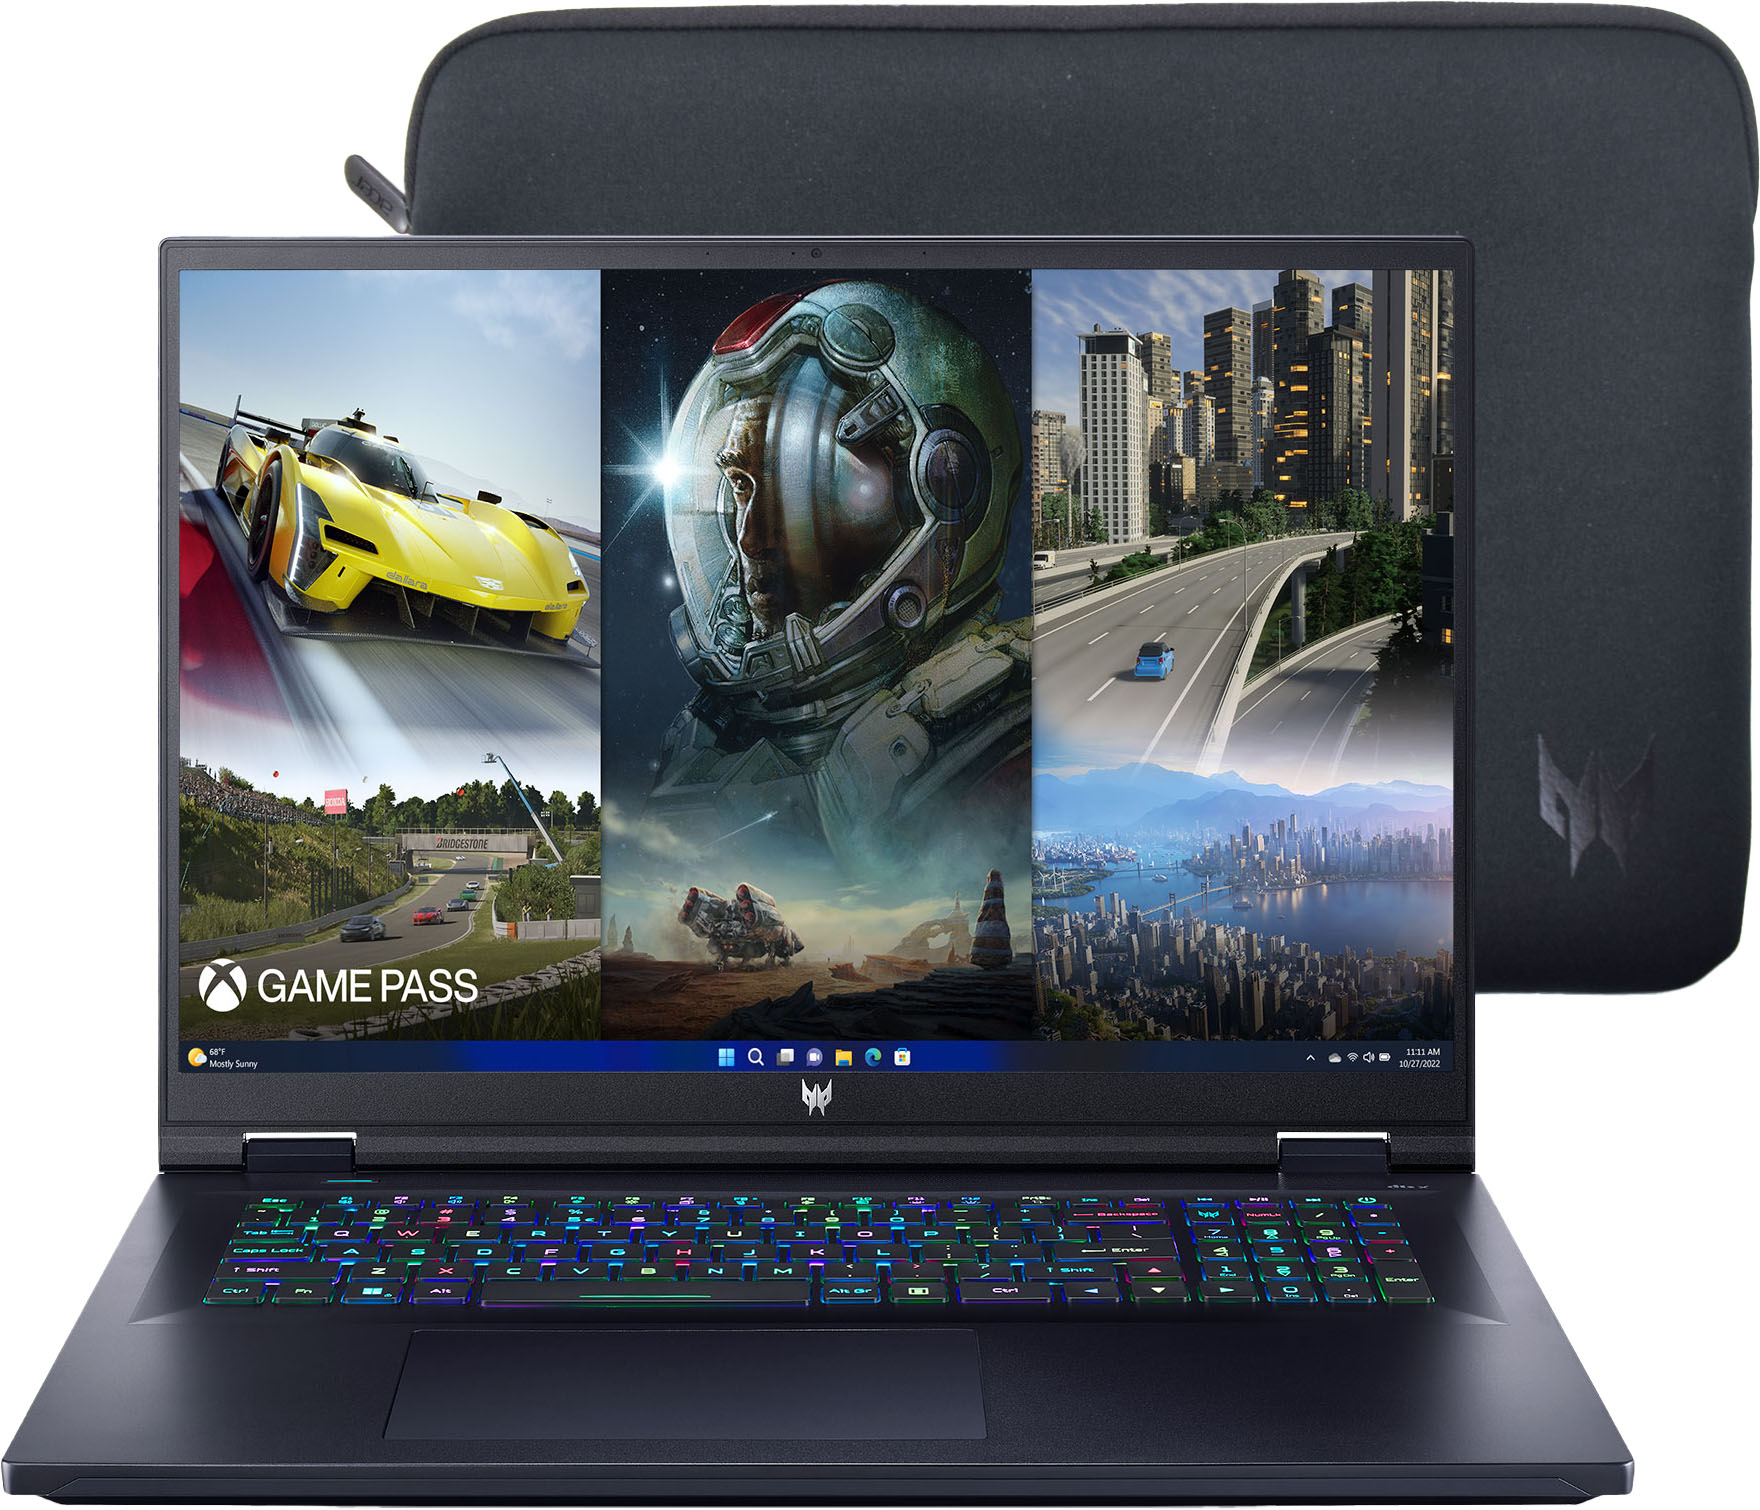 Intel® Pushes Laptop Gaming & Video Creation to the Next Generation